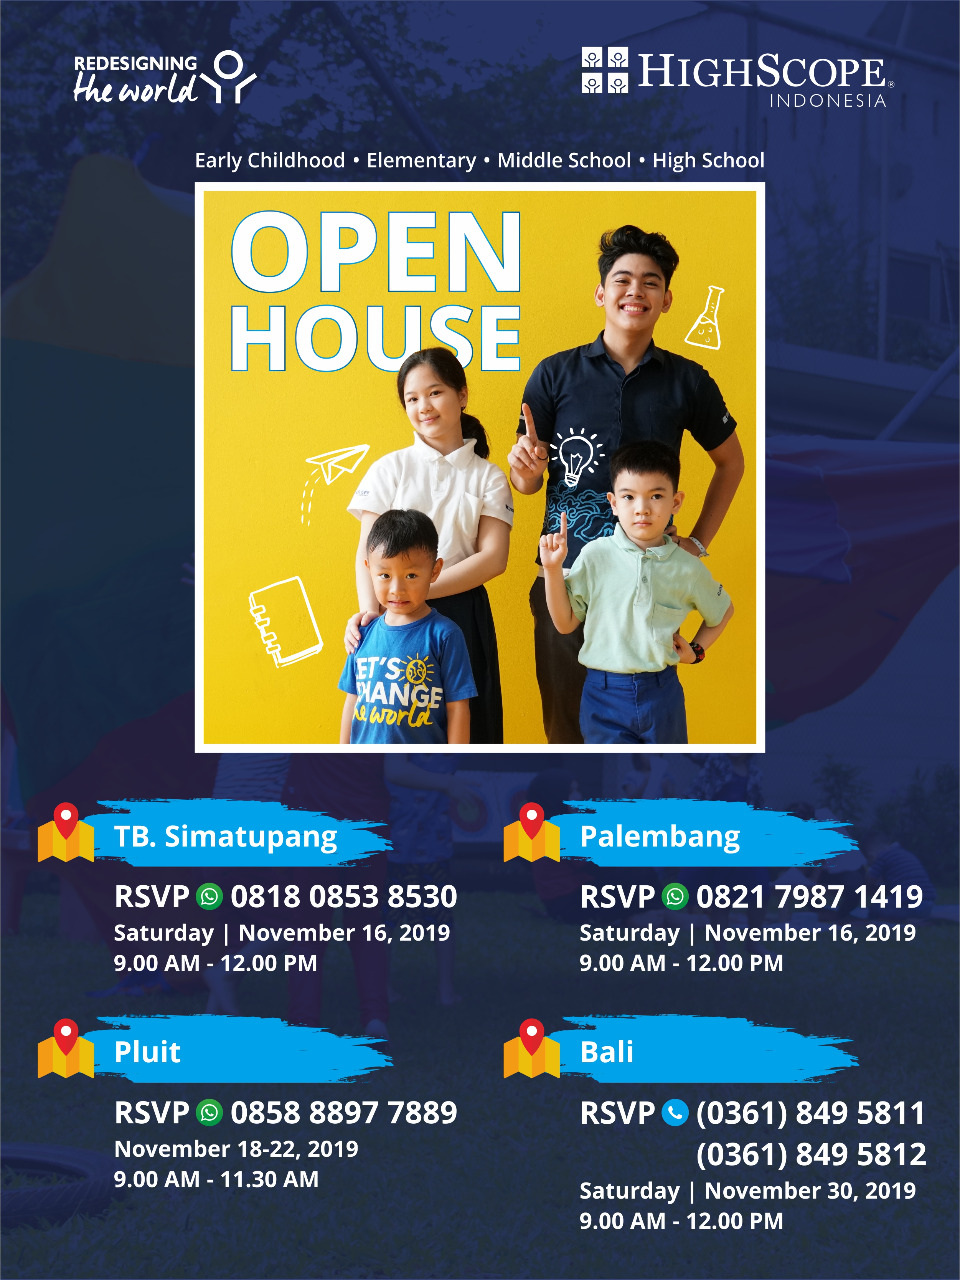 HighScope Indonesia Open House 